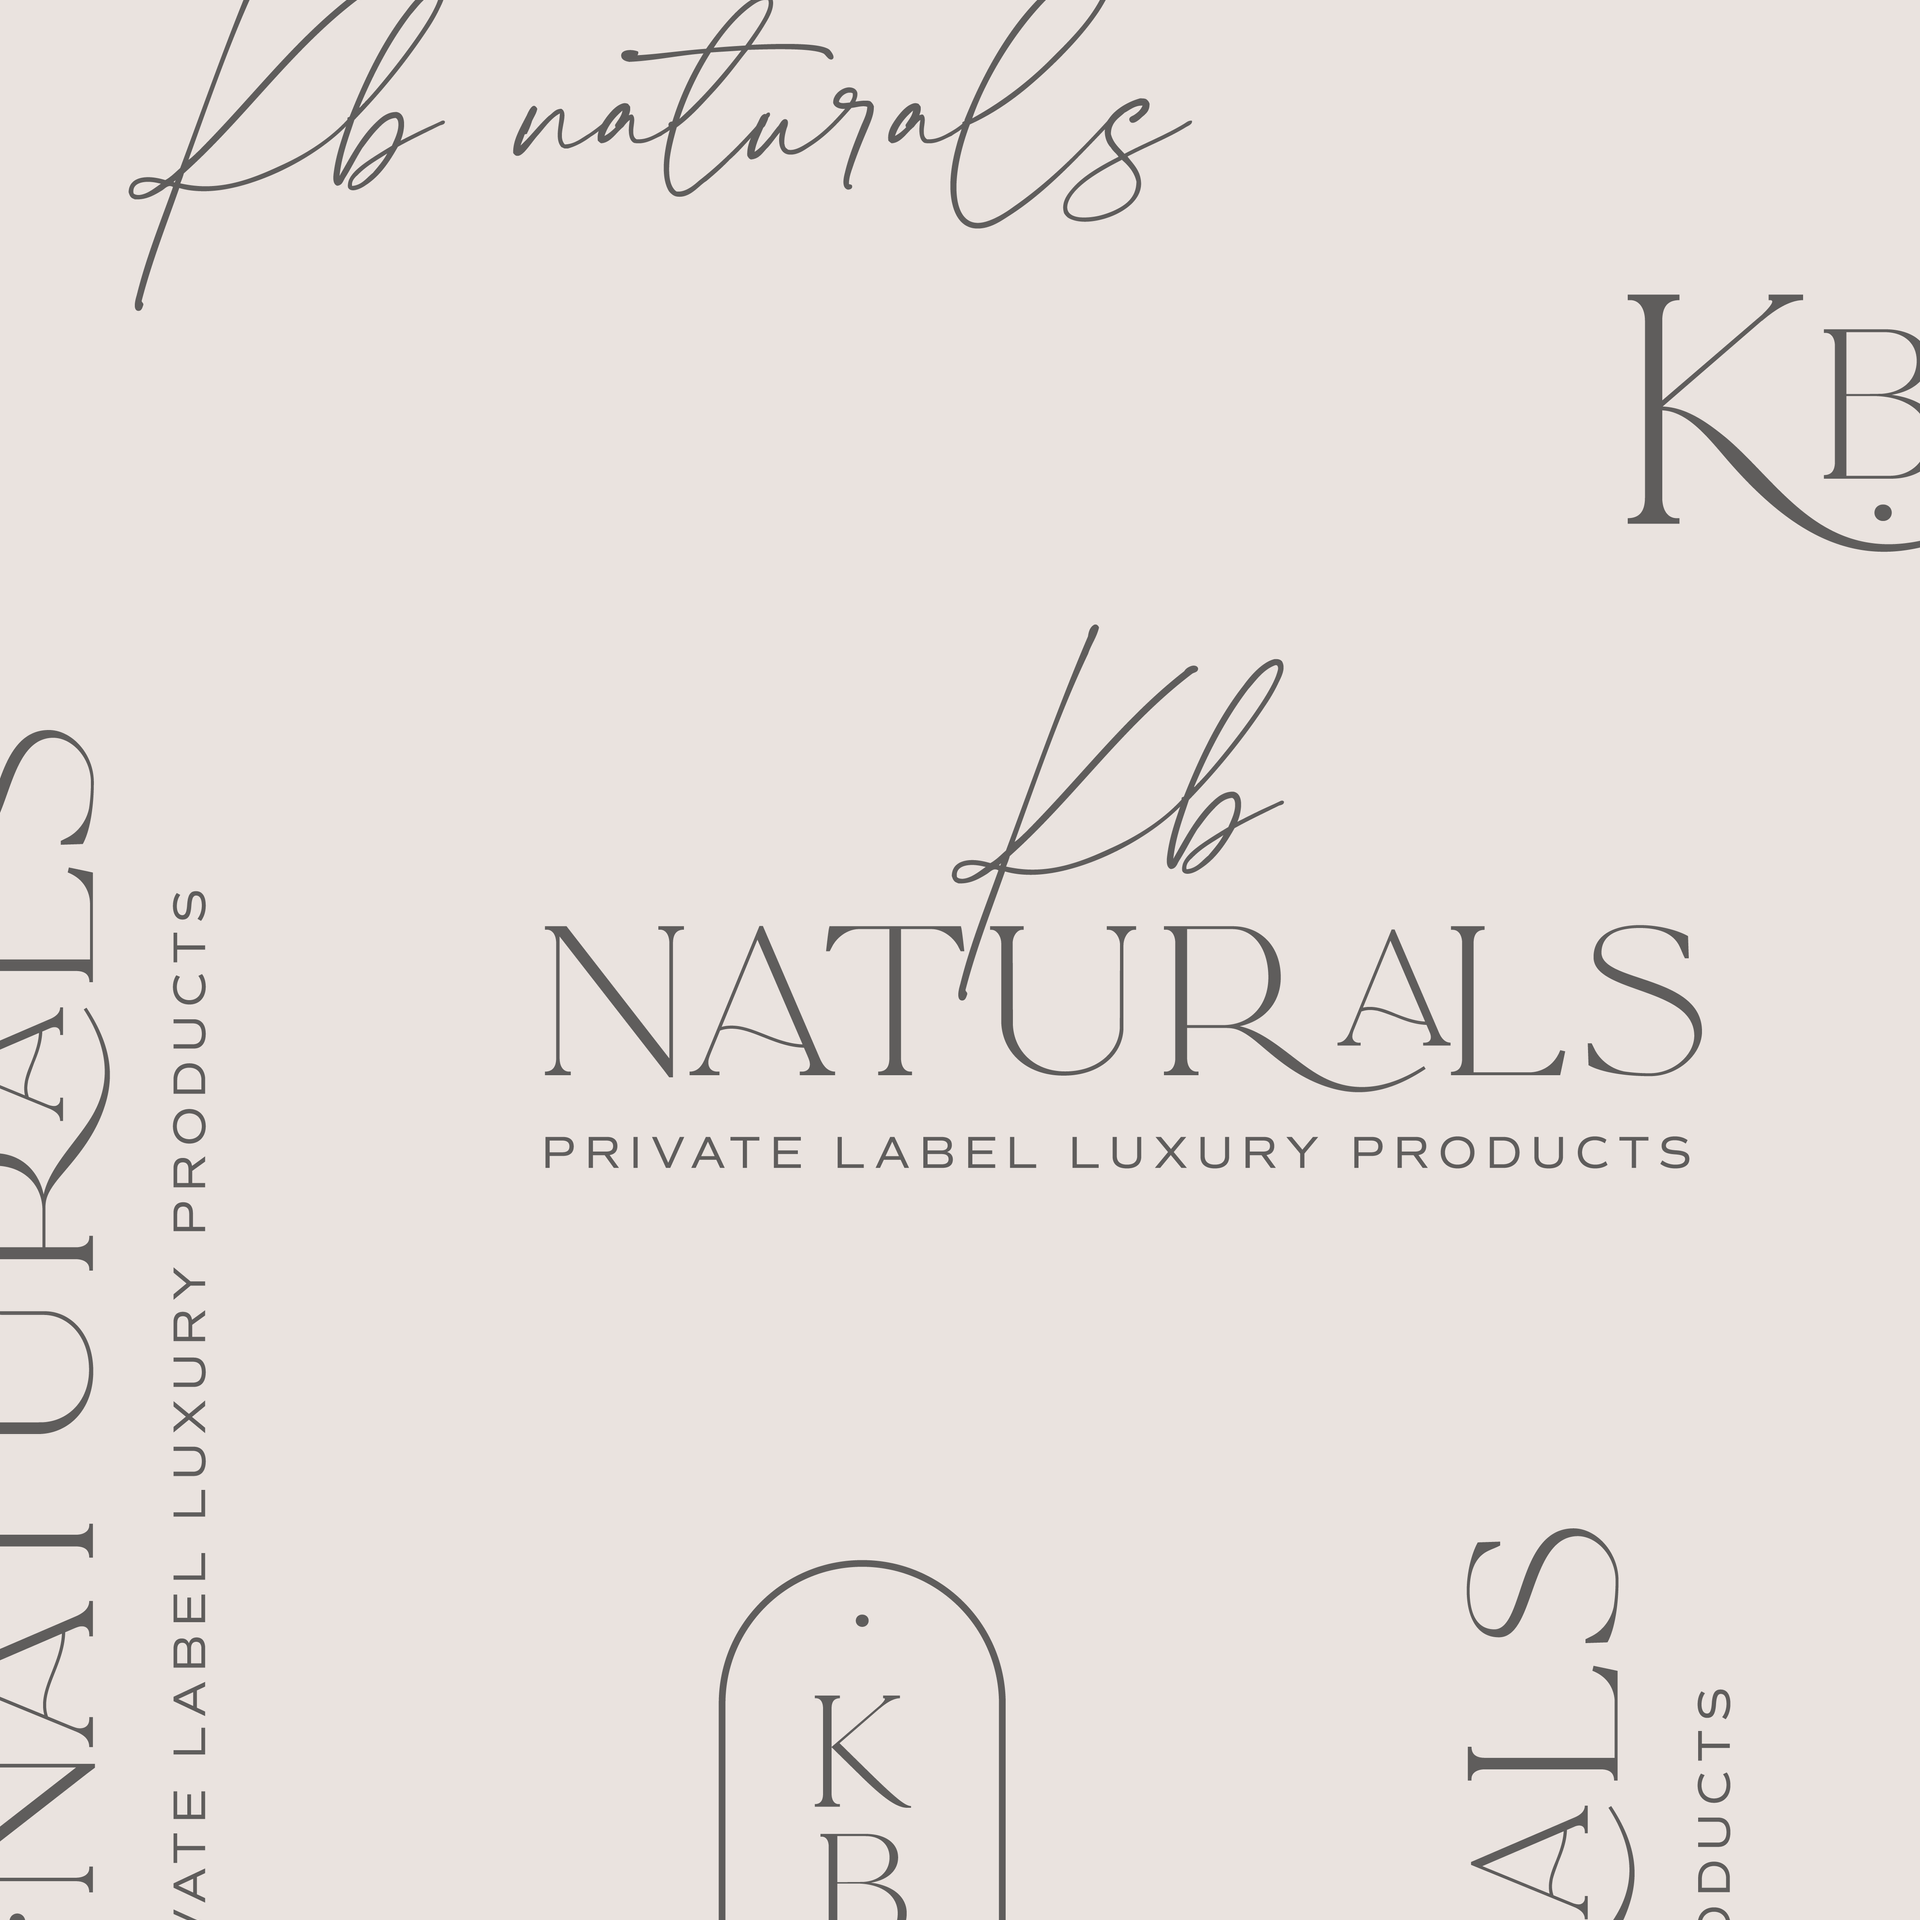 luxury logo design for spa and wellness providers